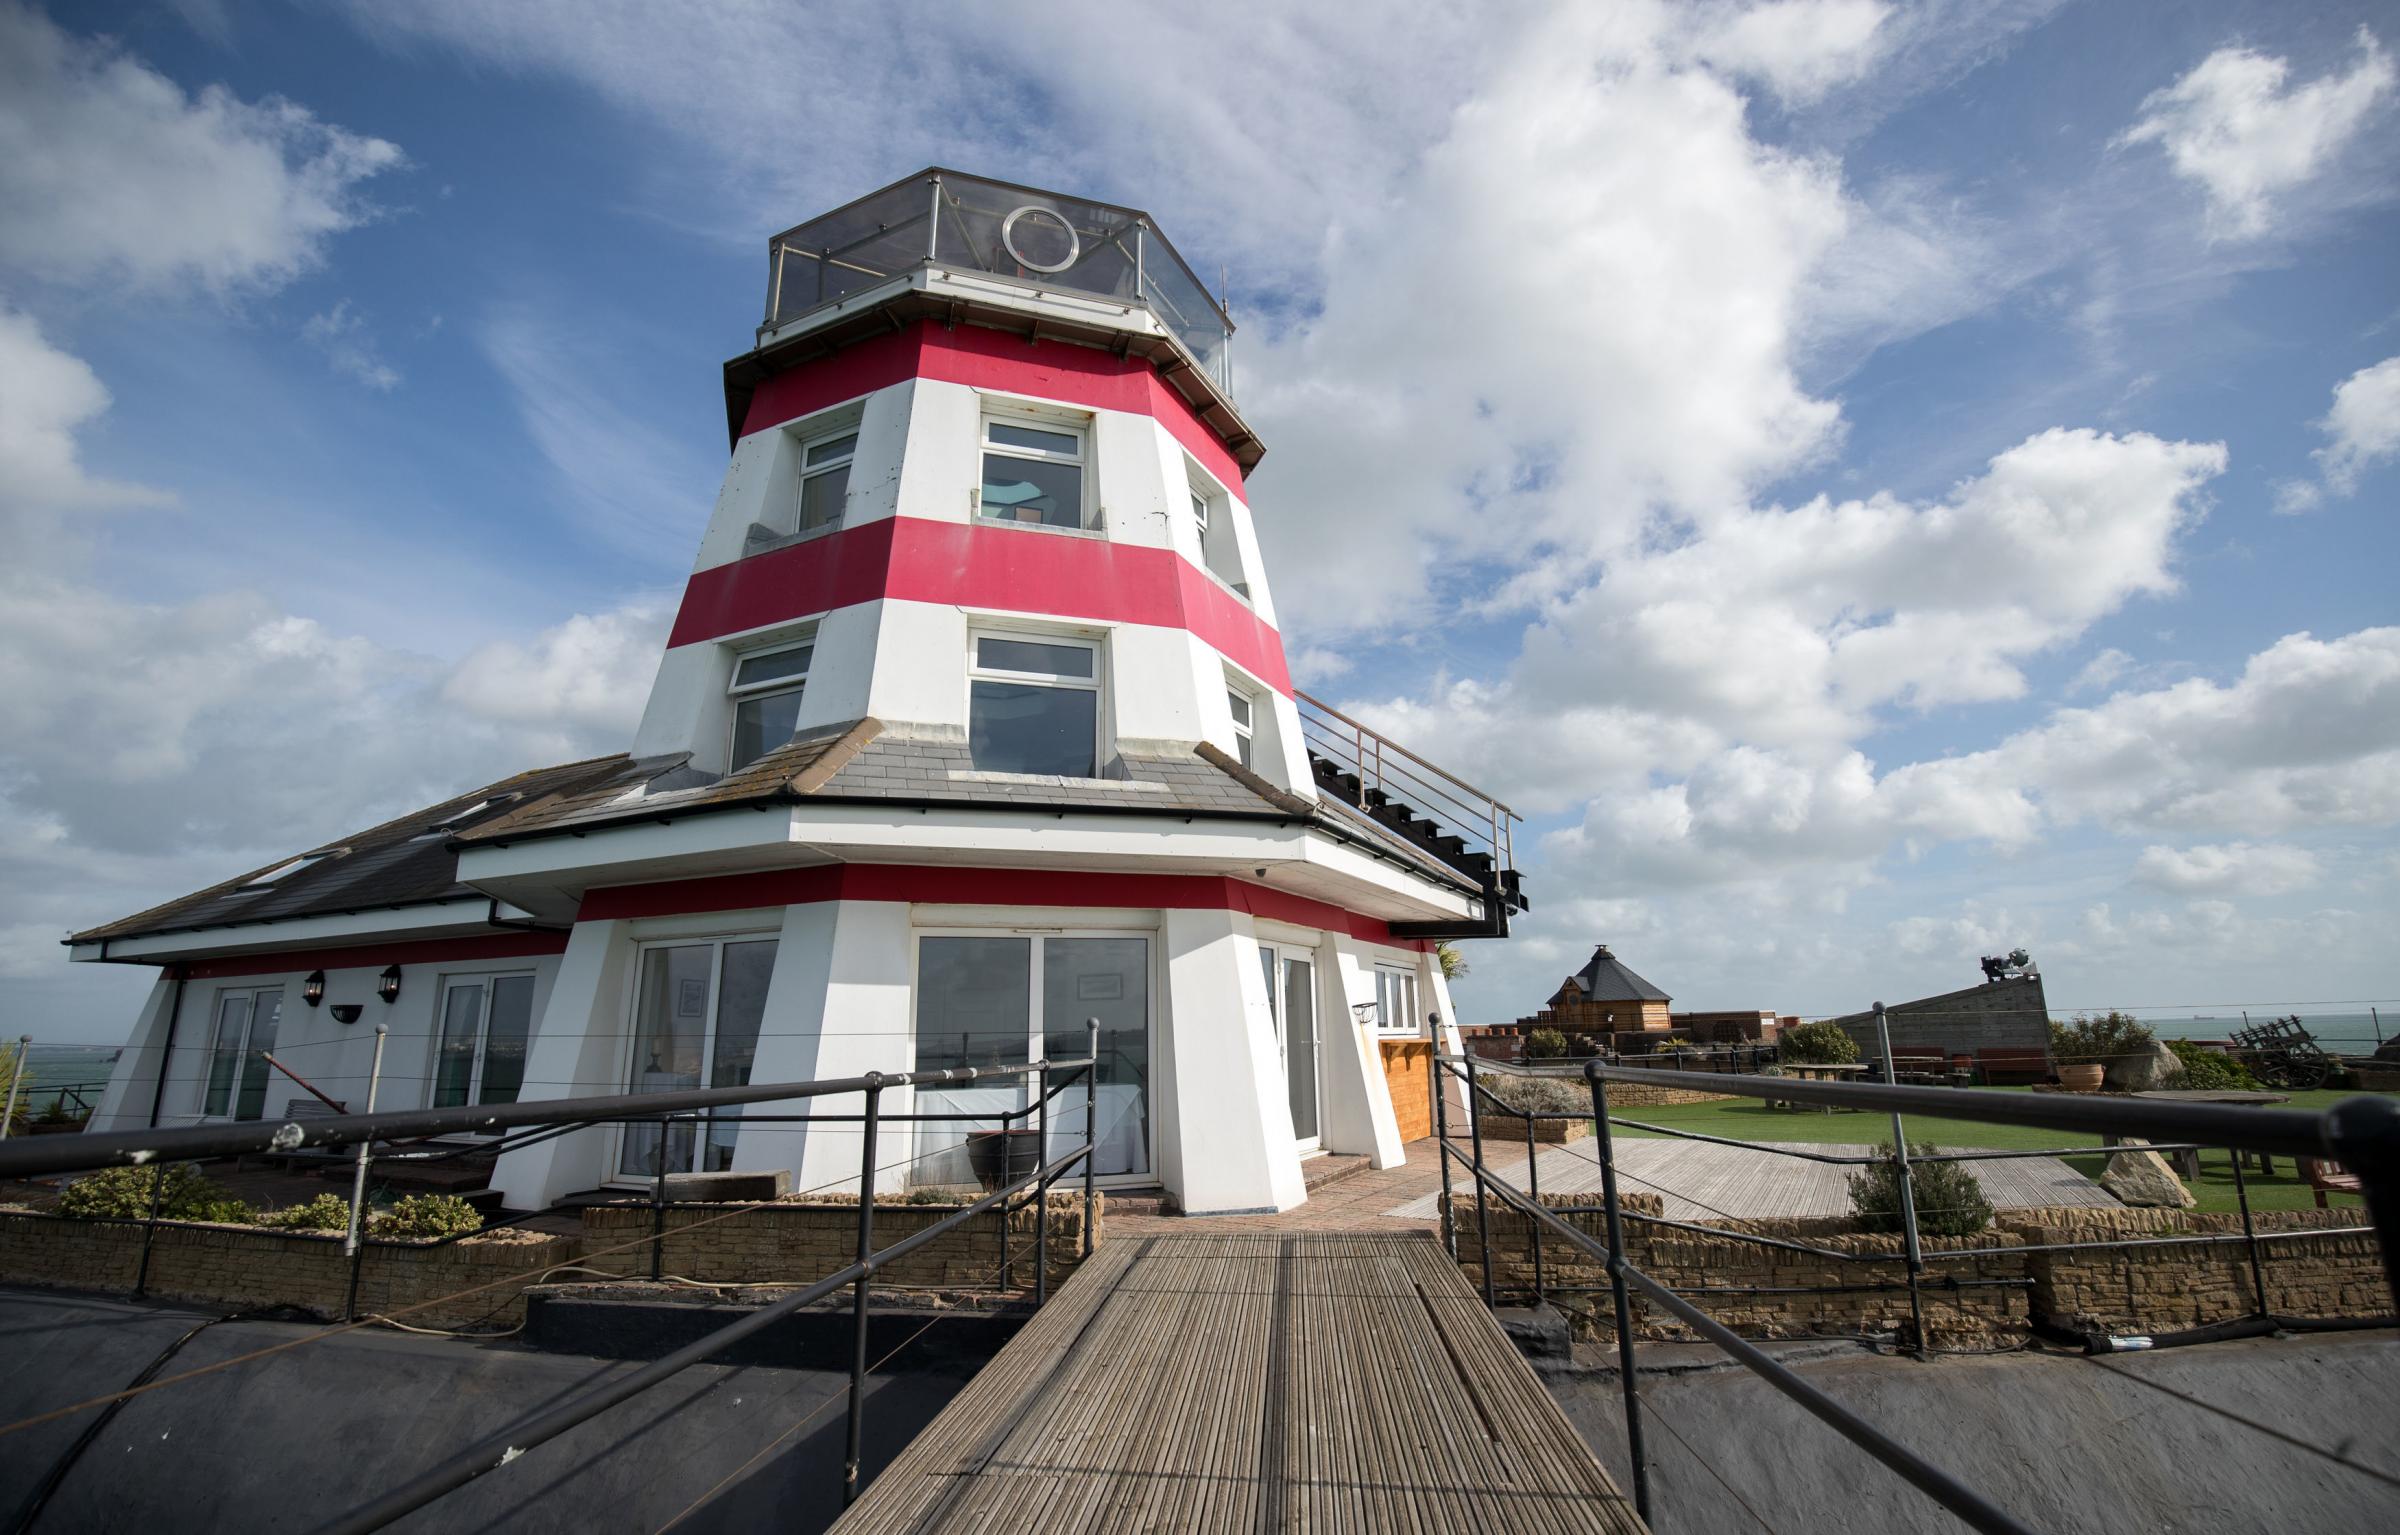 General view of the lighthouse on No Mans fort, which is part of Solent Forts and is up for sale with Colliers along with Spitbank Fort. The two forts are former Palmerston Forts built in the 19th century and today are both luxury hotels. PA Photo.